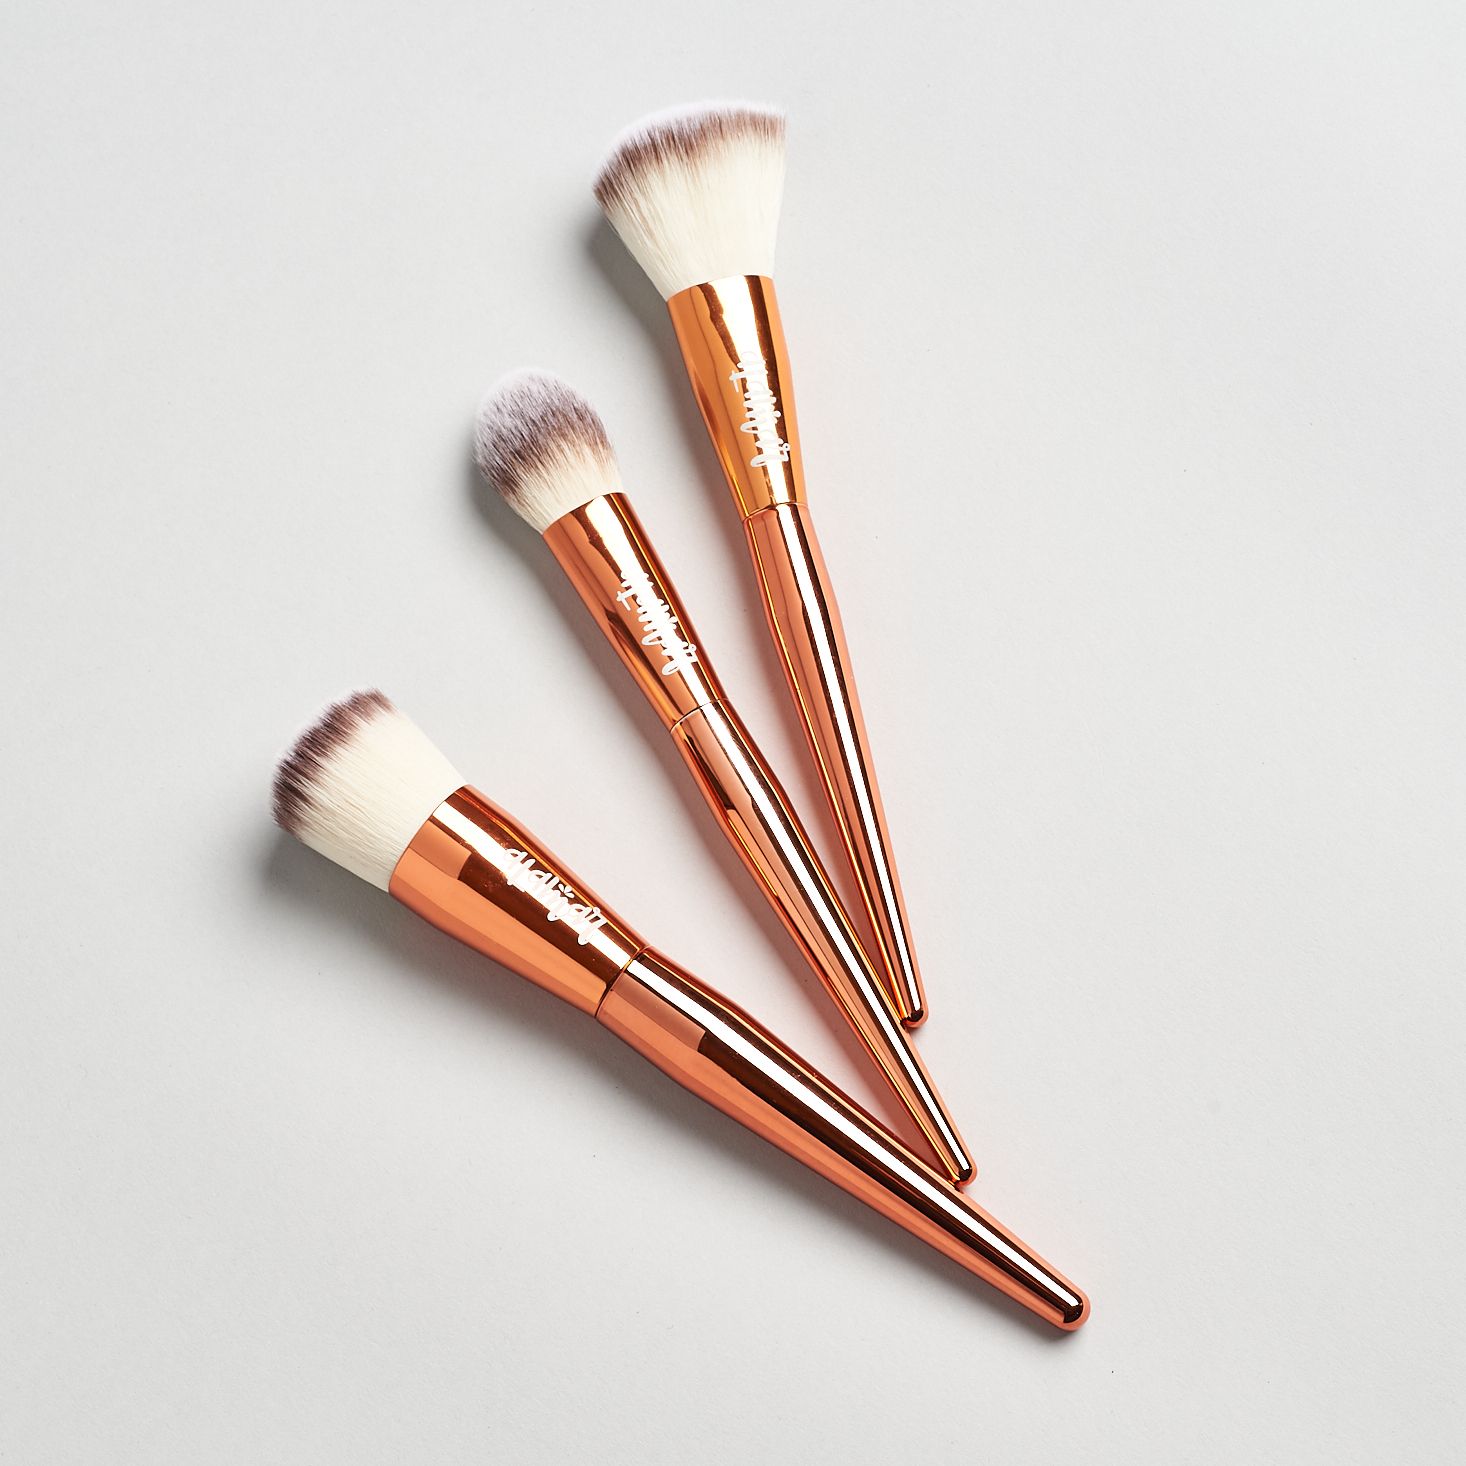 trip of rose gold brushes with white bristles